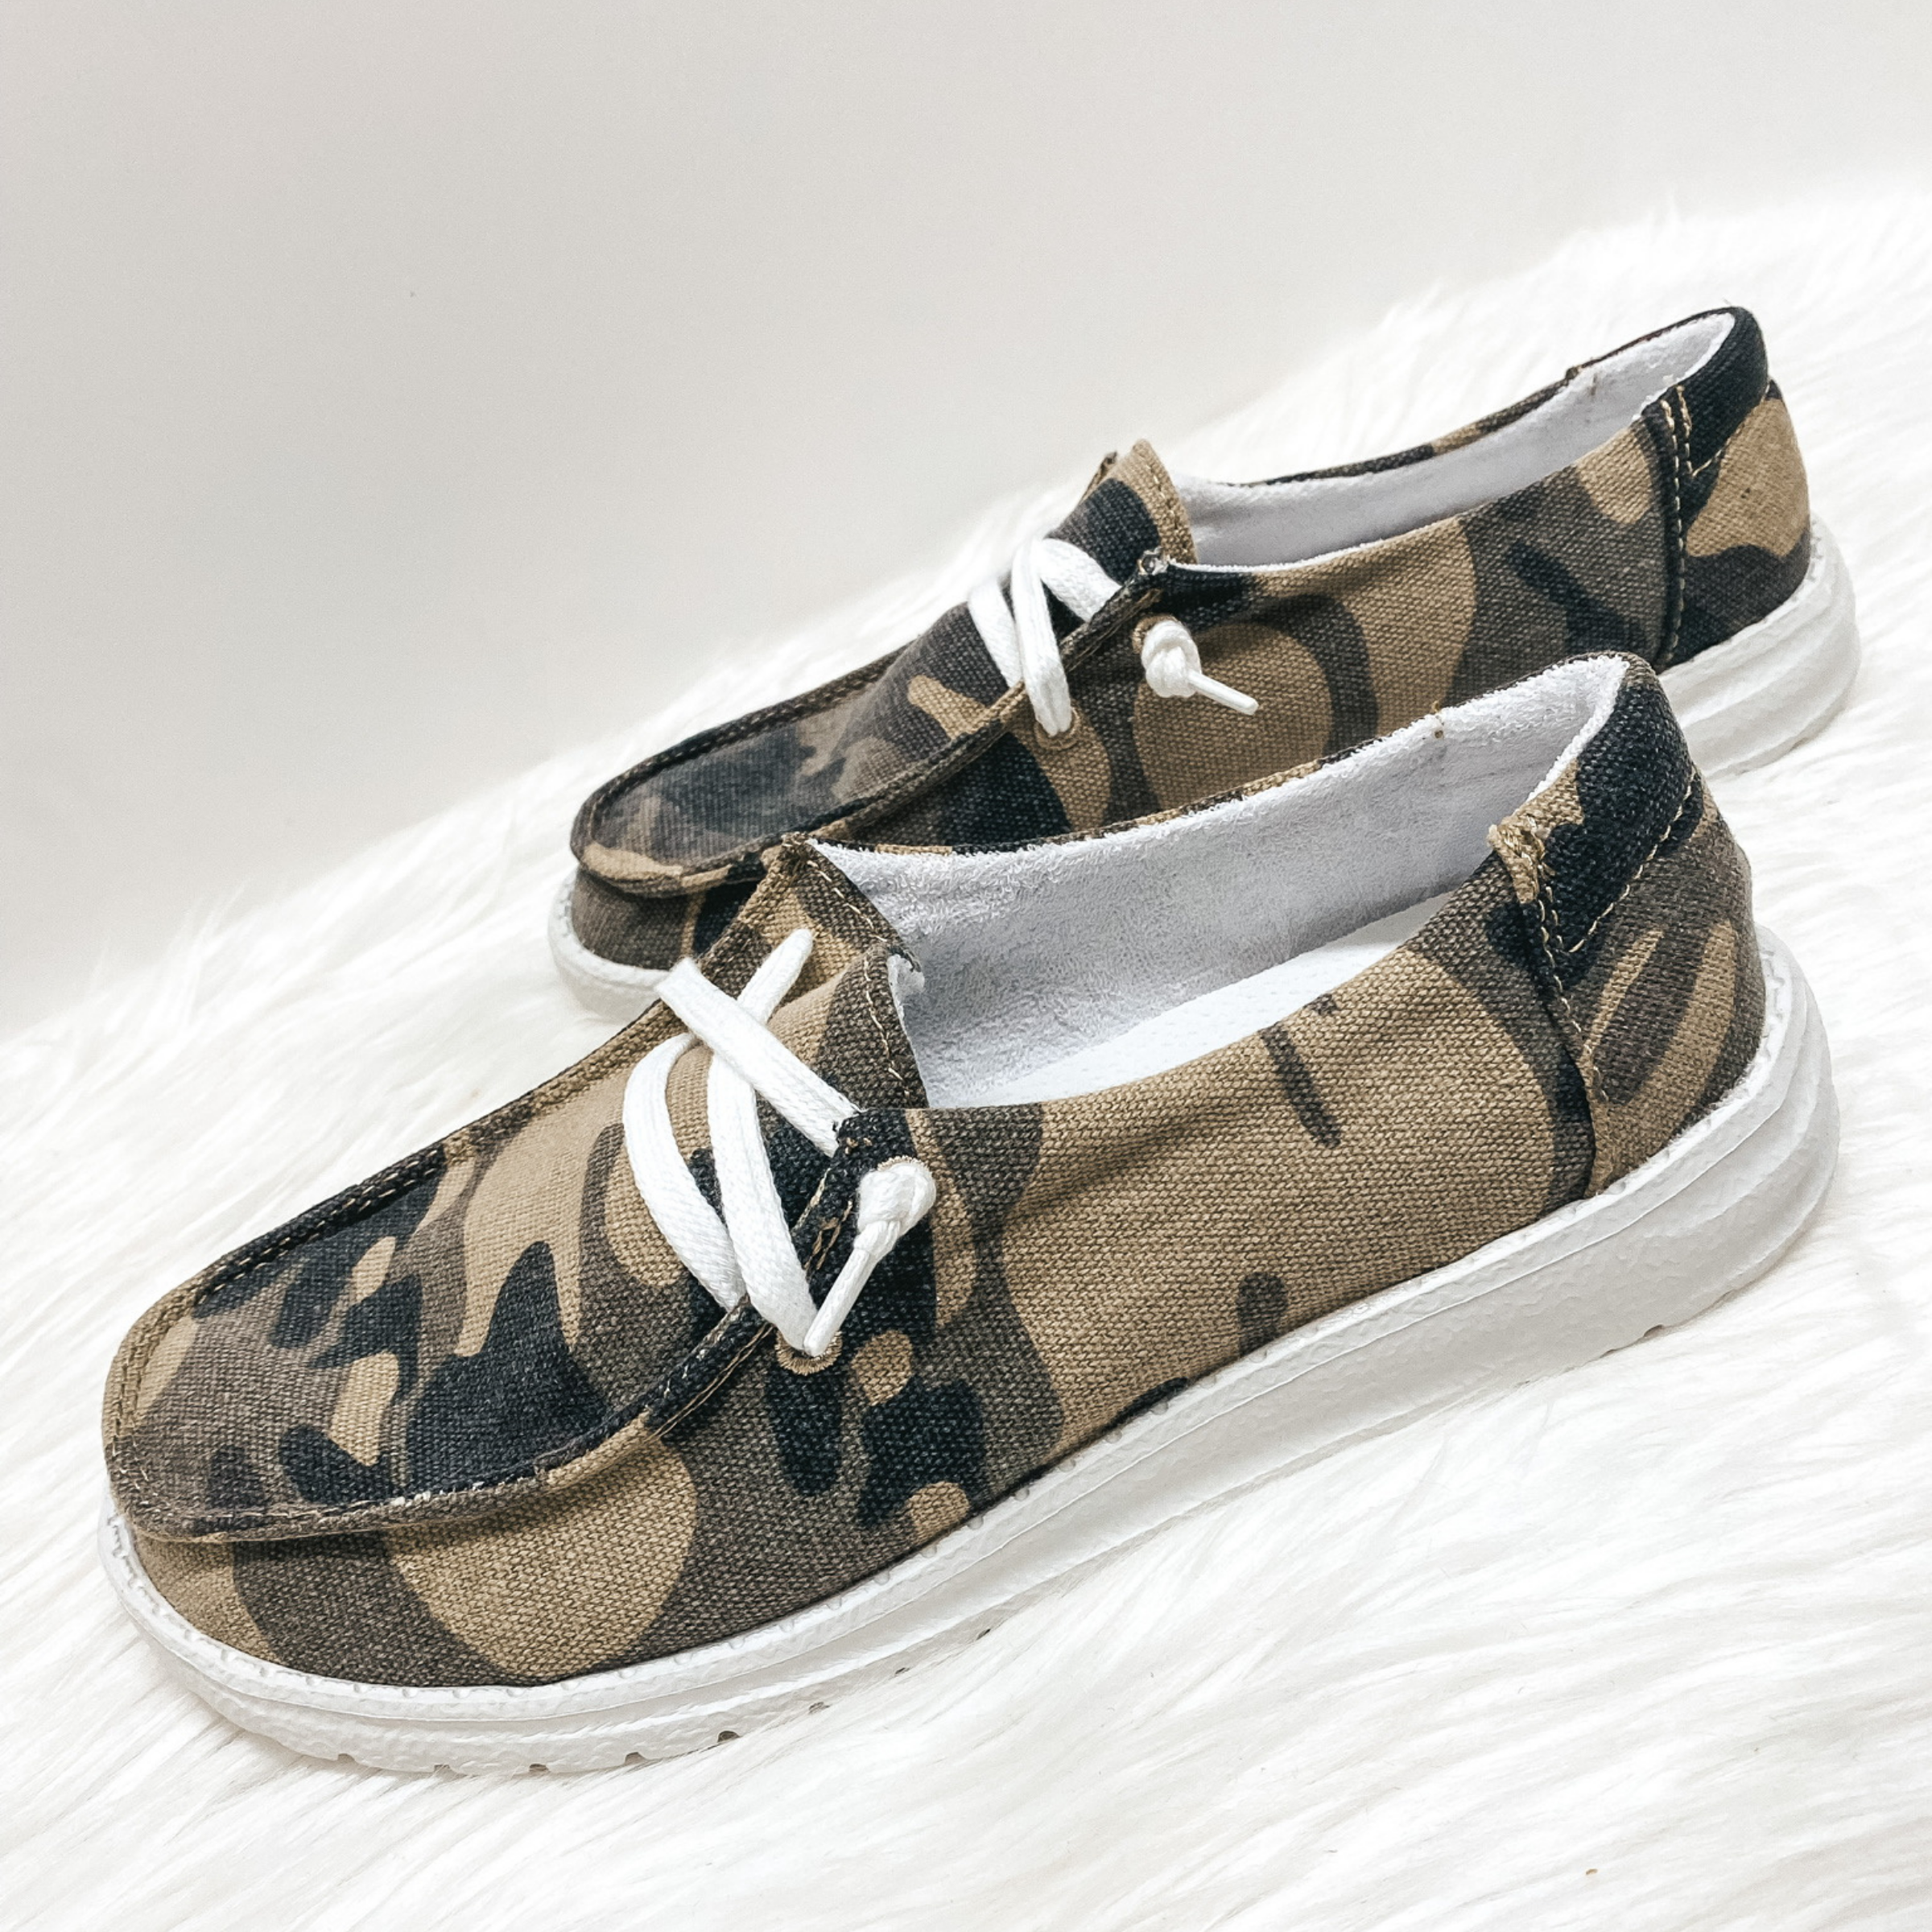 Very G | Have To Run Slip On Loafers with Laces in Camouflage